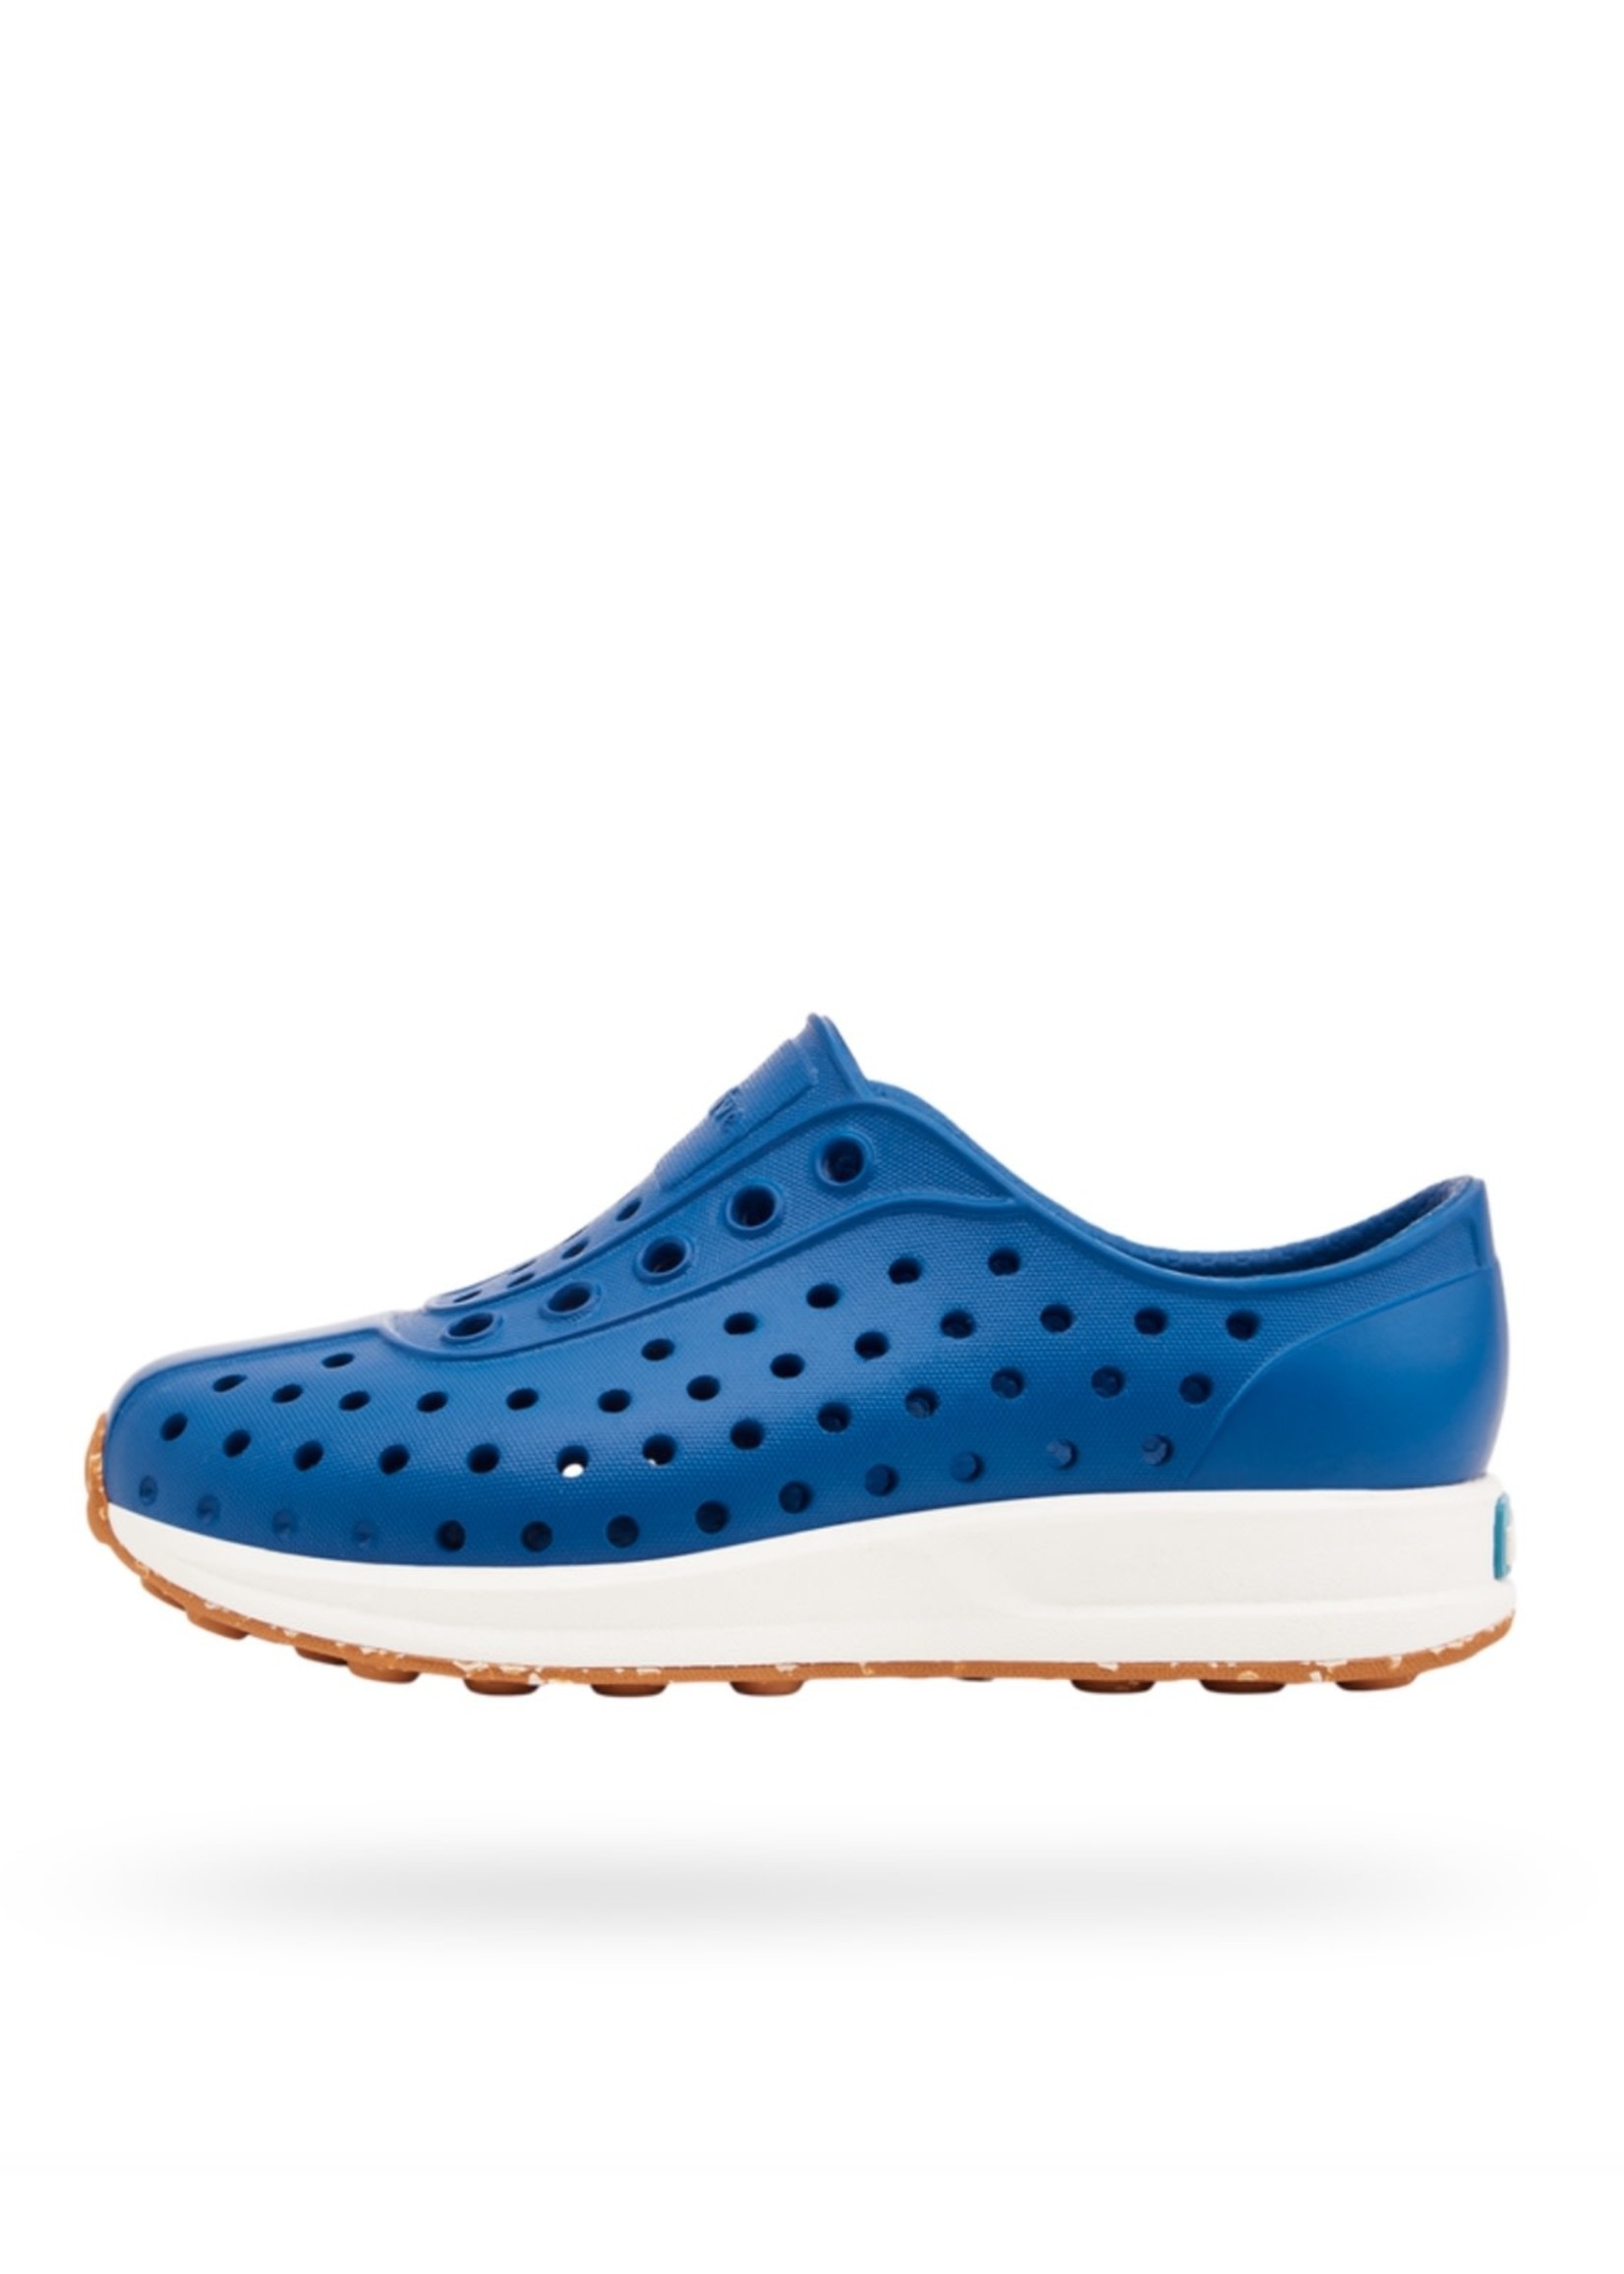 Native Shoes Native Shoes, Robbie Sugarlite™ Youth / Junior in Victoria Blue/ Shell White/ Mash Speckle Rubber